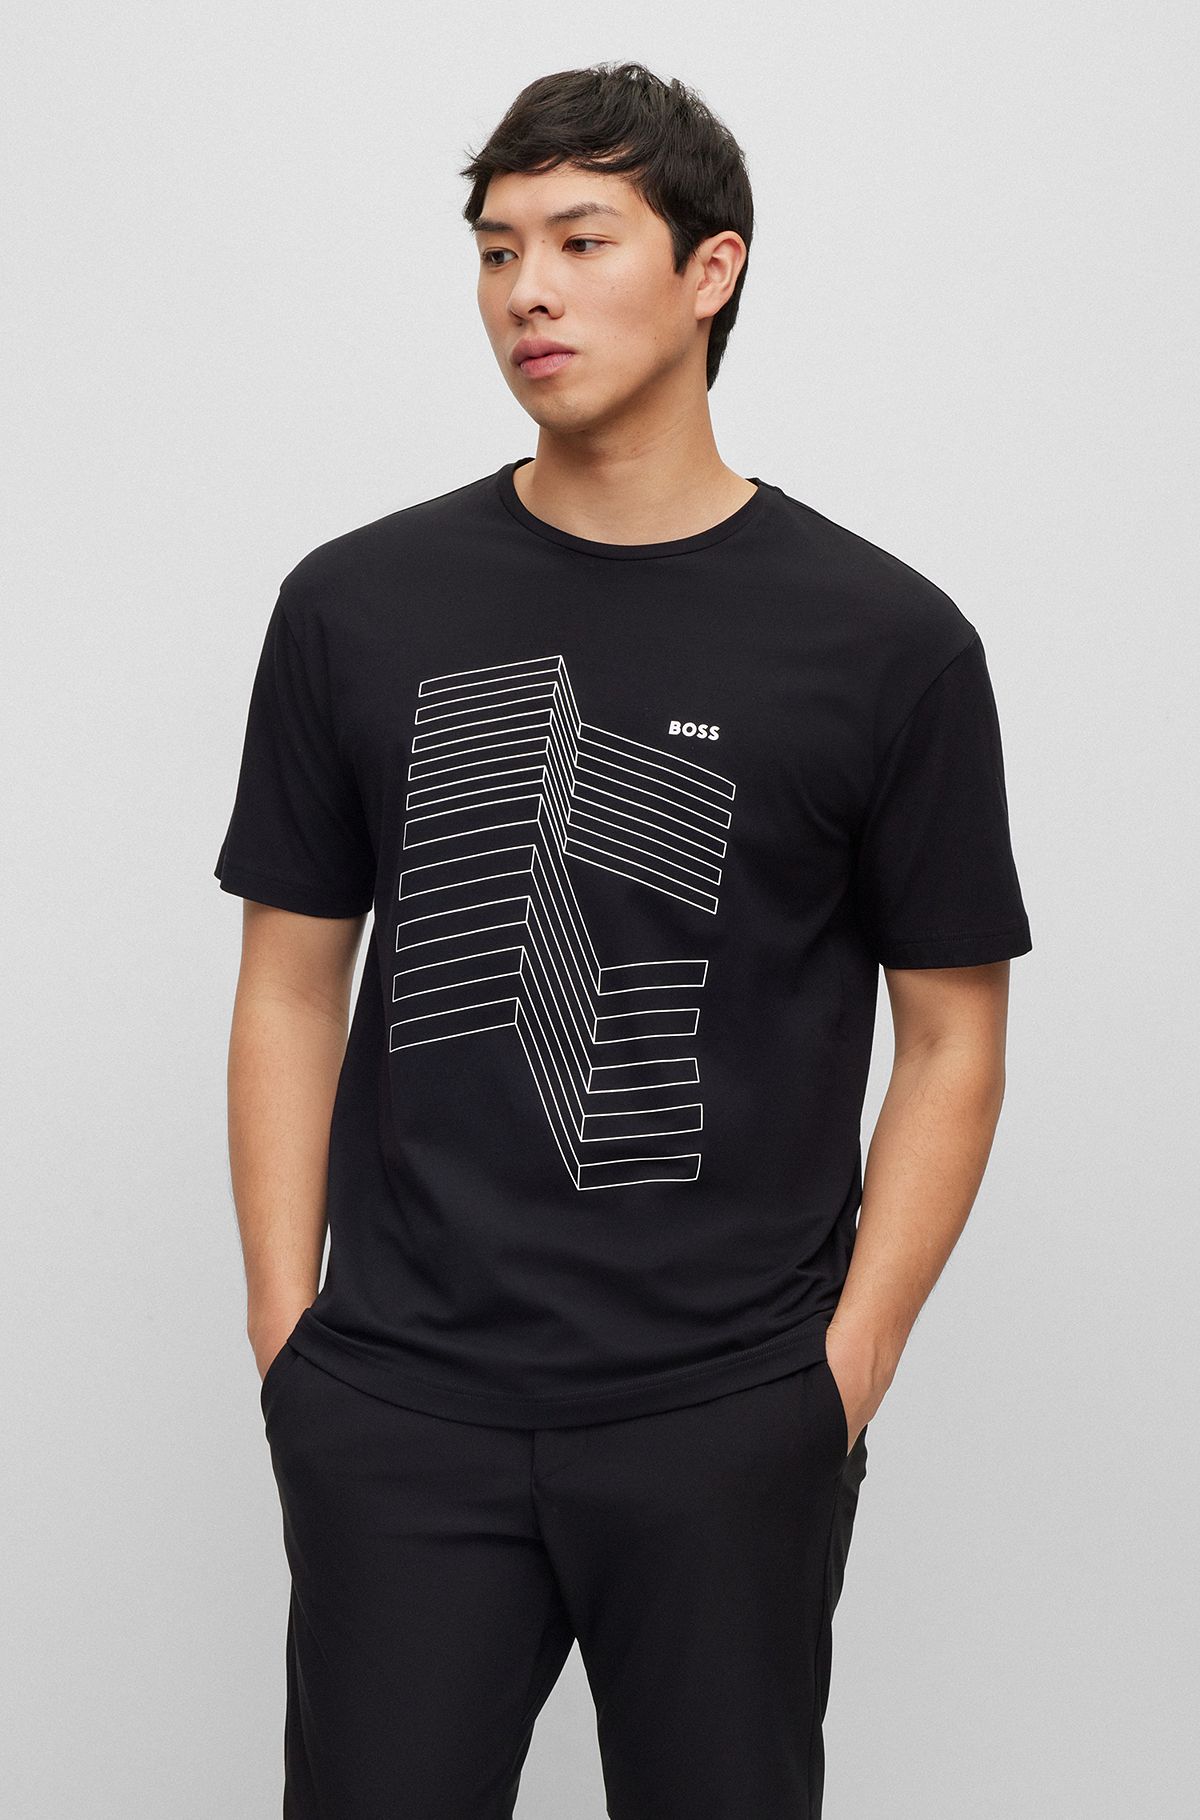 BOSS - Relaxed-fit logo T-shirt artwork with in stretch cotton